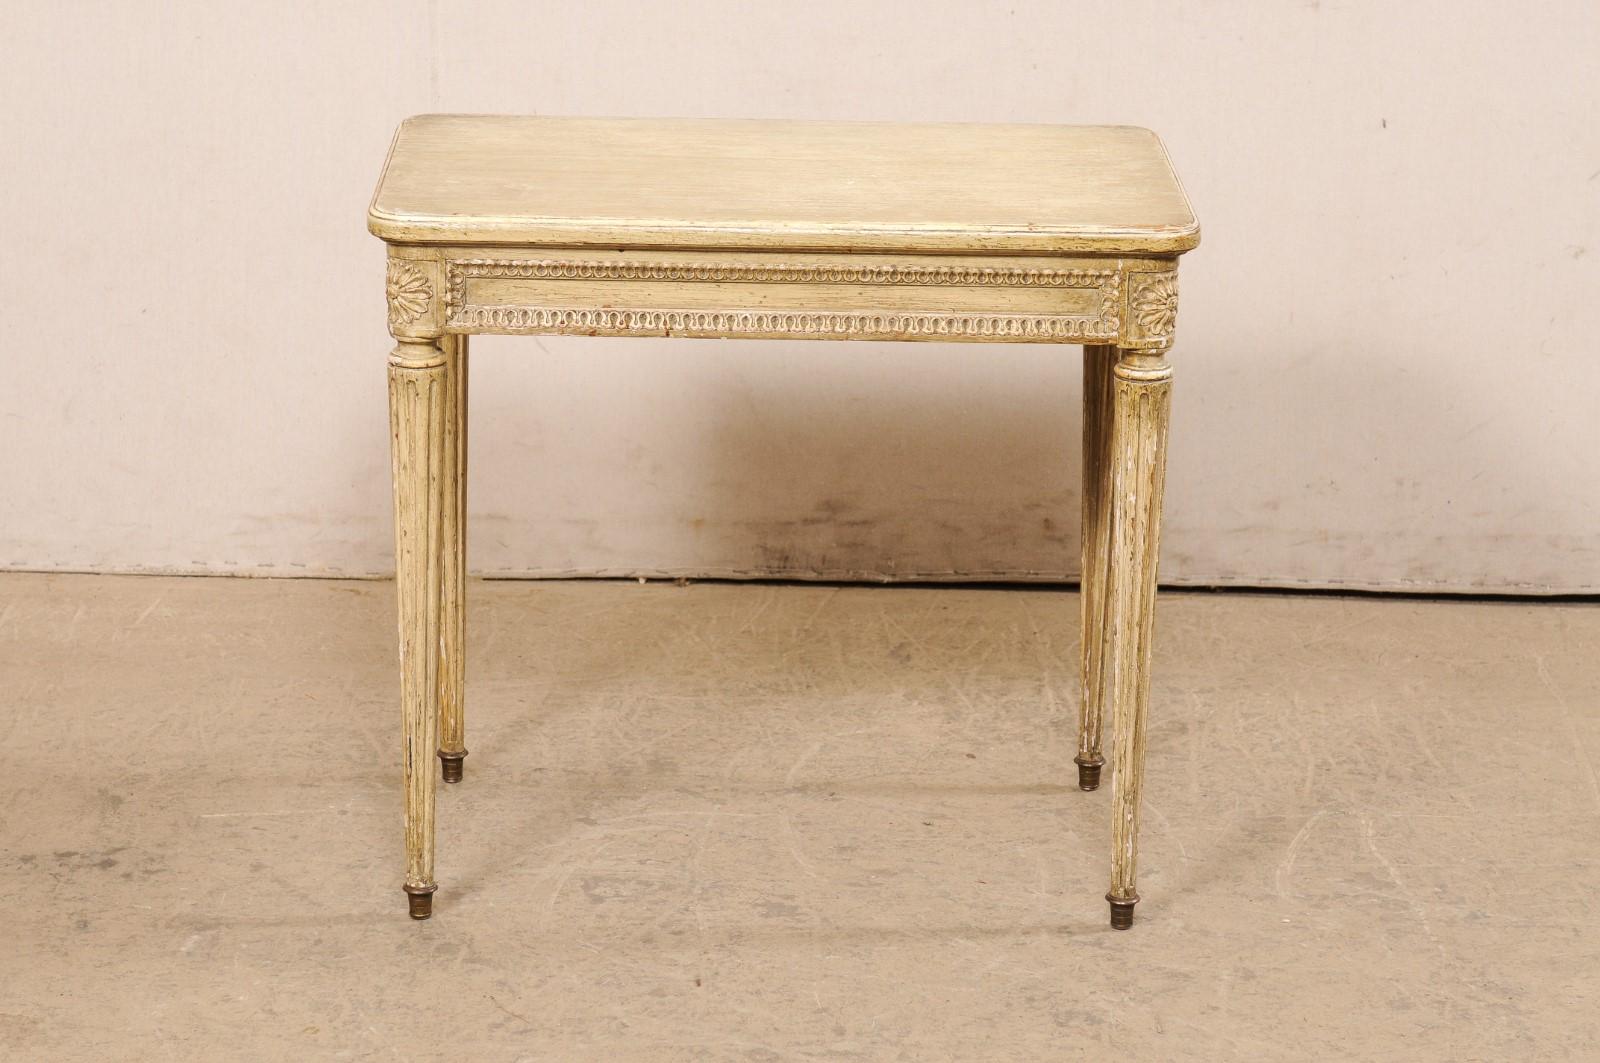 Louis XVI Style French Side Table with its Original Painted Finish Early 20th C. For Sale 3